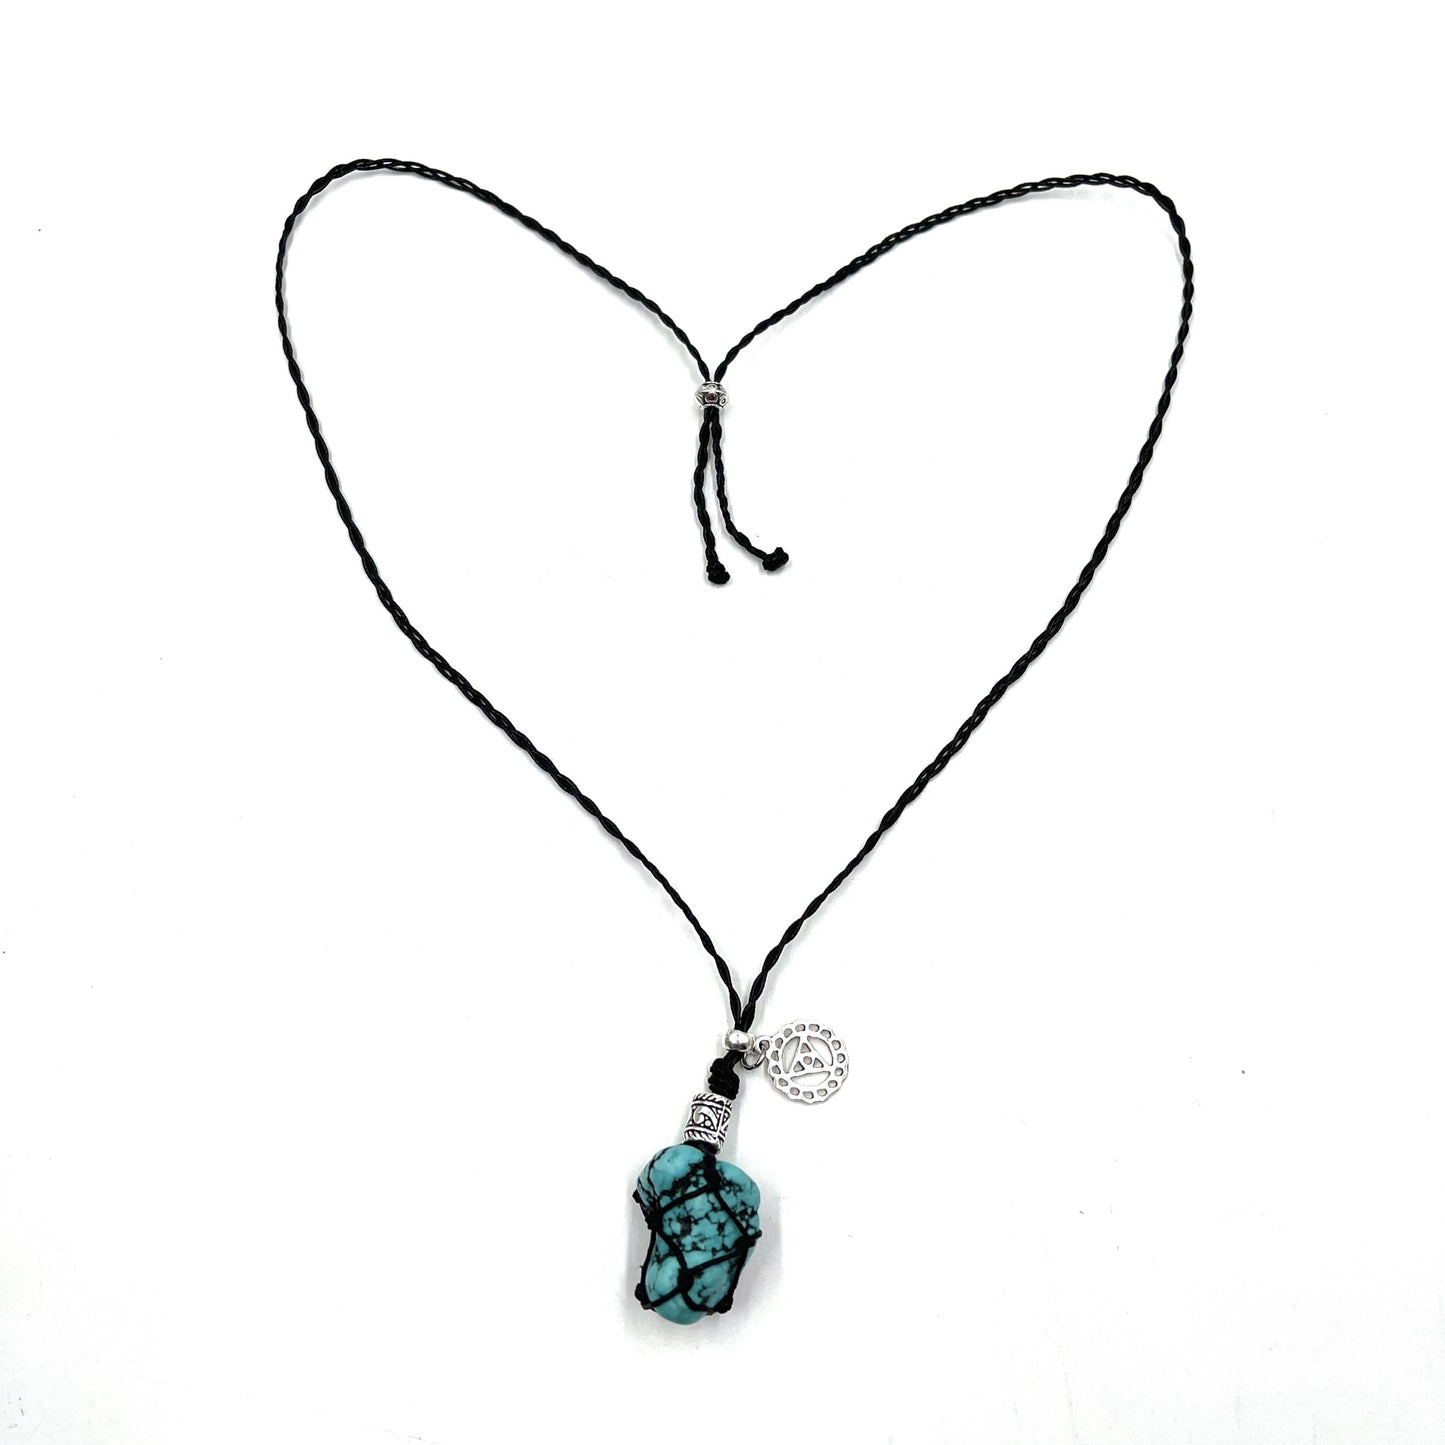 Braided Stone Necklace Turquoise (Howlite)